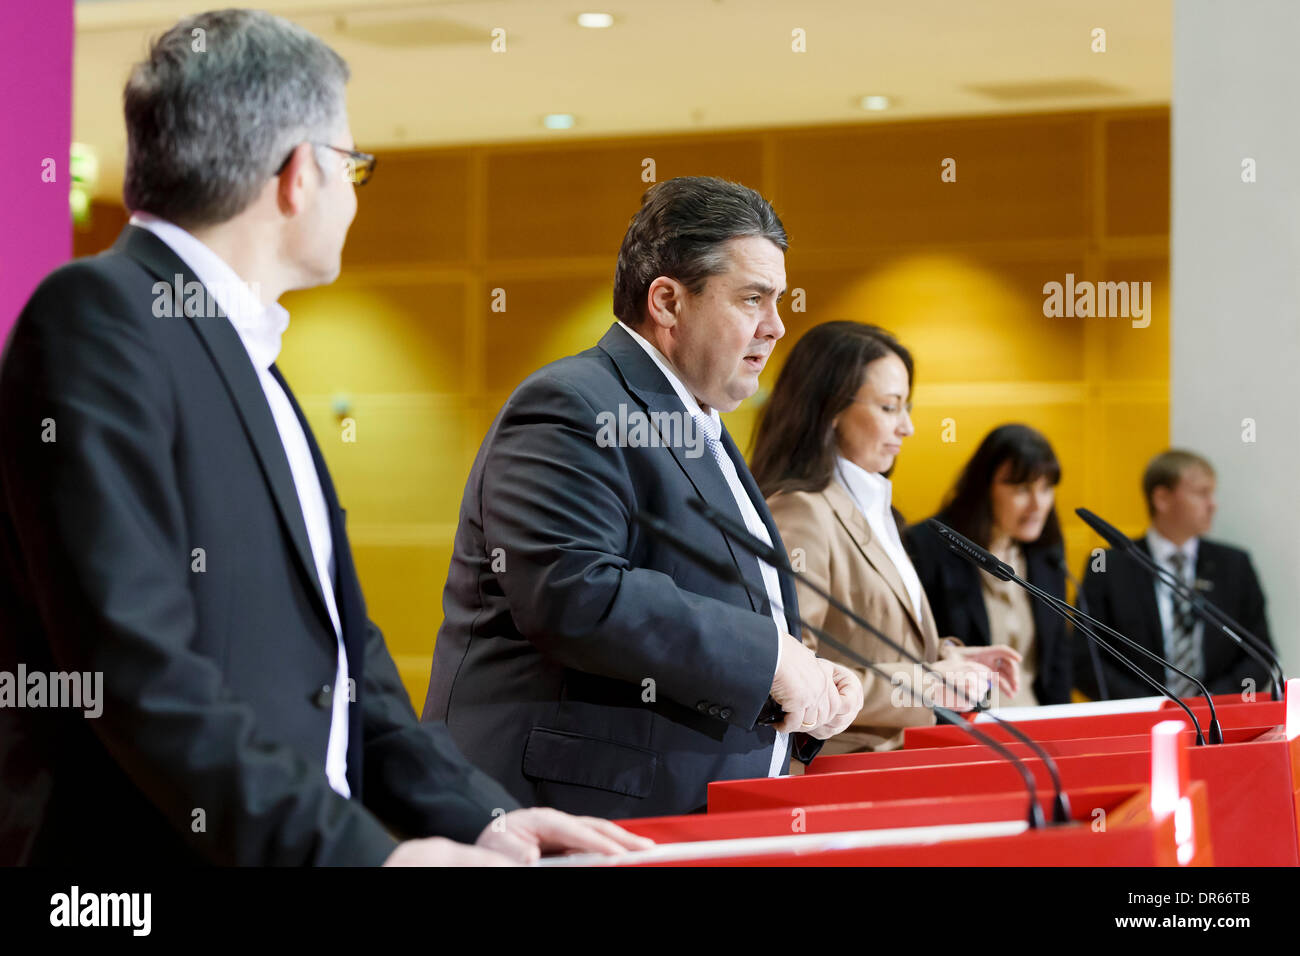 Berlin, Germany. January 20th, 2014. SPD Press conference with SPD Chairman Gabriel, the new SPD General Secretary, Fahimi and new SPD Treasurer, Nietan at Willy-Brandt-Haus in Berlin. / Picture:   Sigmar Gabriel (SPD), SPD Party Chef and German Minister of Economy and Energy, Yasmin Fahimi (SPD), SPD General Secretary,  and Dietmar Nietan (SPD), SPD Treasurer. Credit:  Reynaldo Chaib Paganelli/Alamy Live News Stock Photo